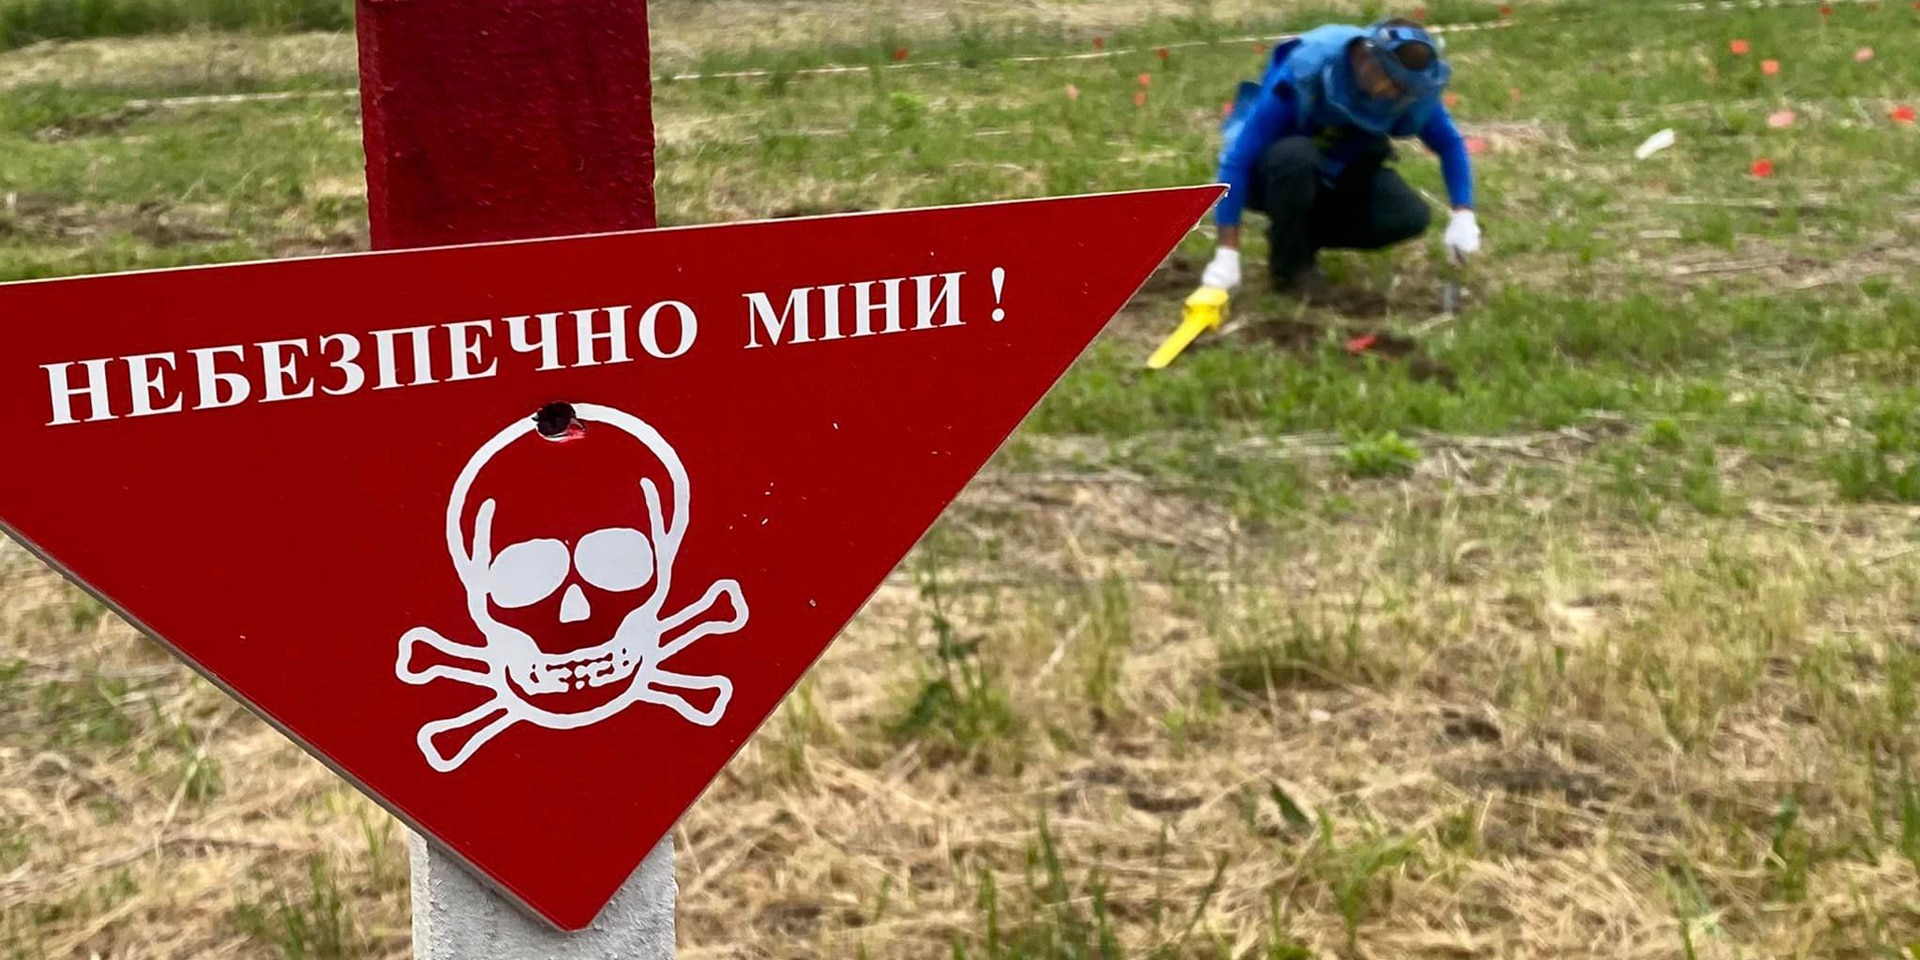 A man in protective clothing works in a field with a life-threatening sign.